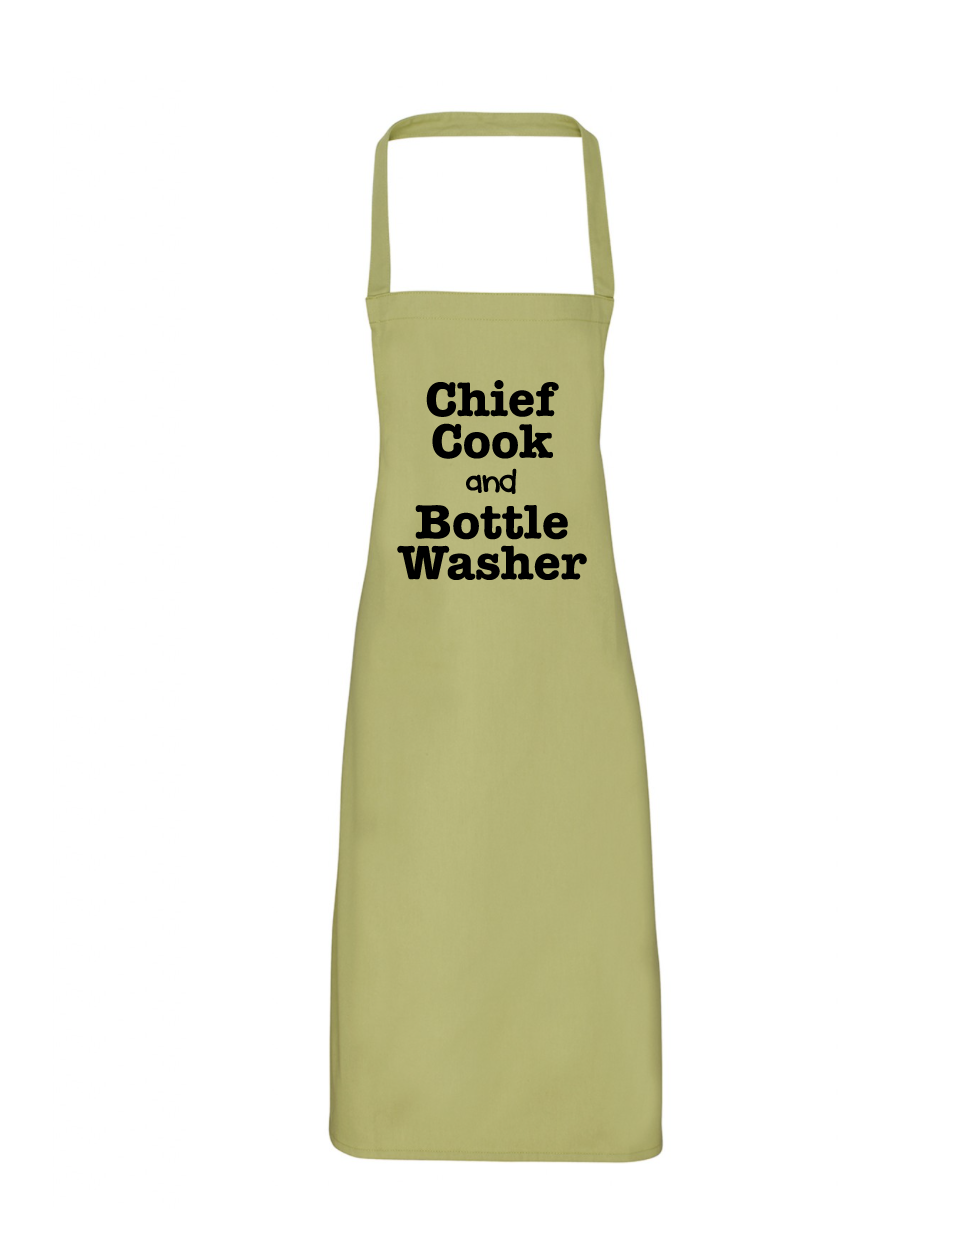 Chief Cook and Bottle Washer Apron